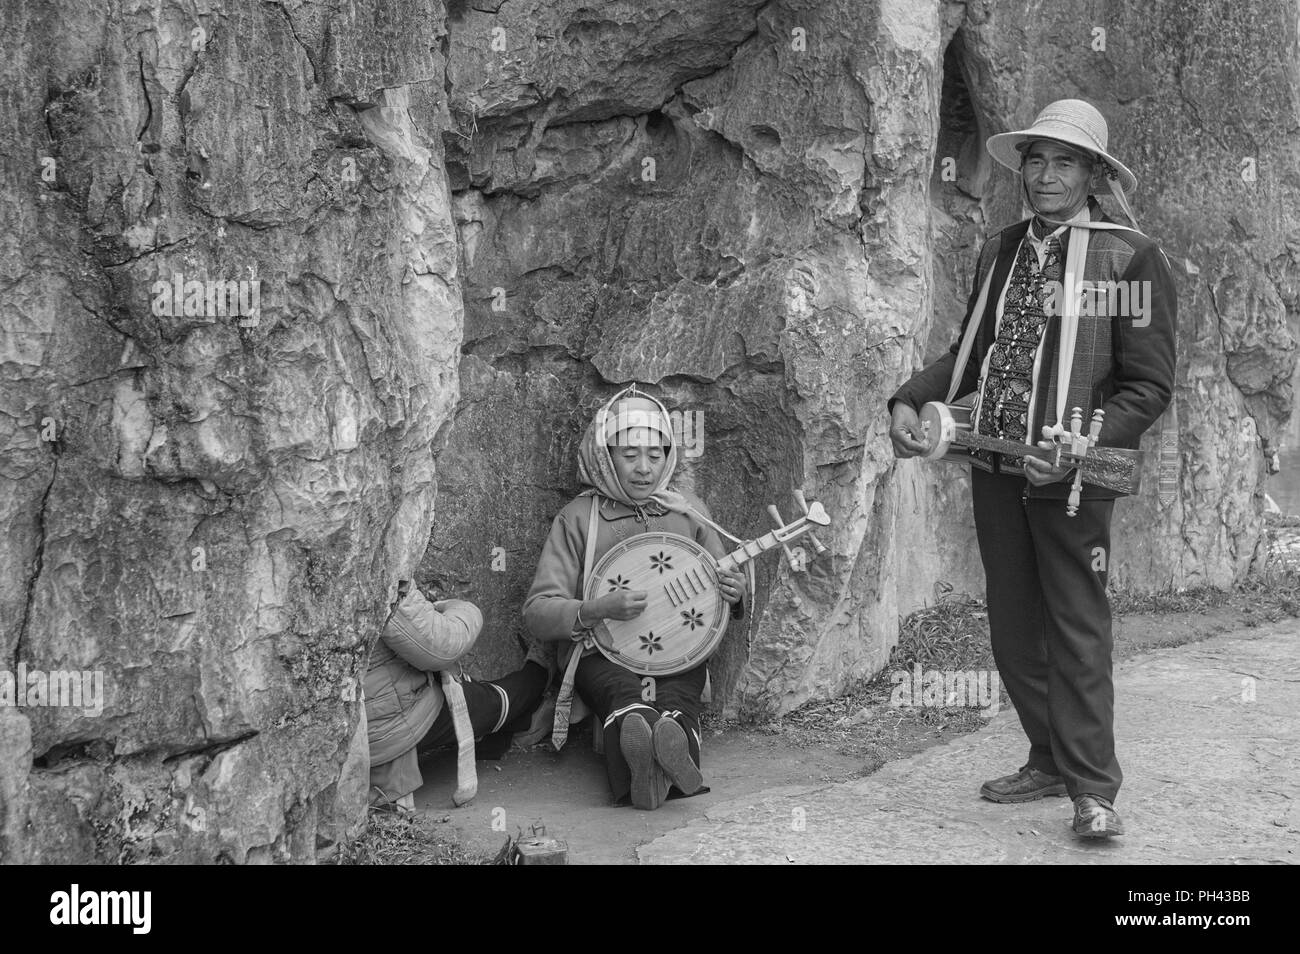 Shilin, Yunnan, China - 31 December 2017: A traditional chinese music band in the Stone Forest Stock Photo